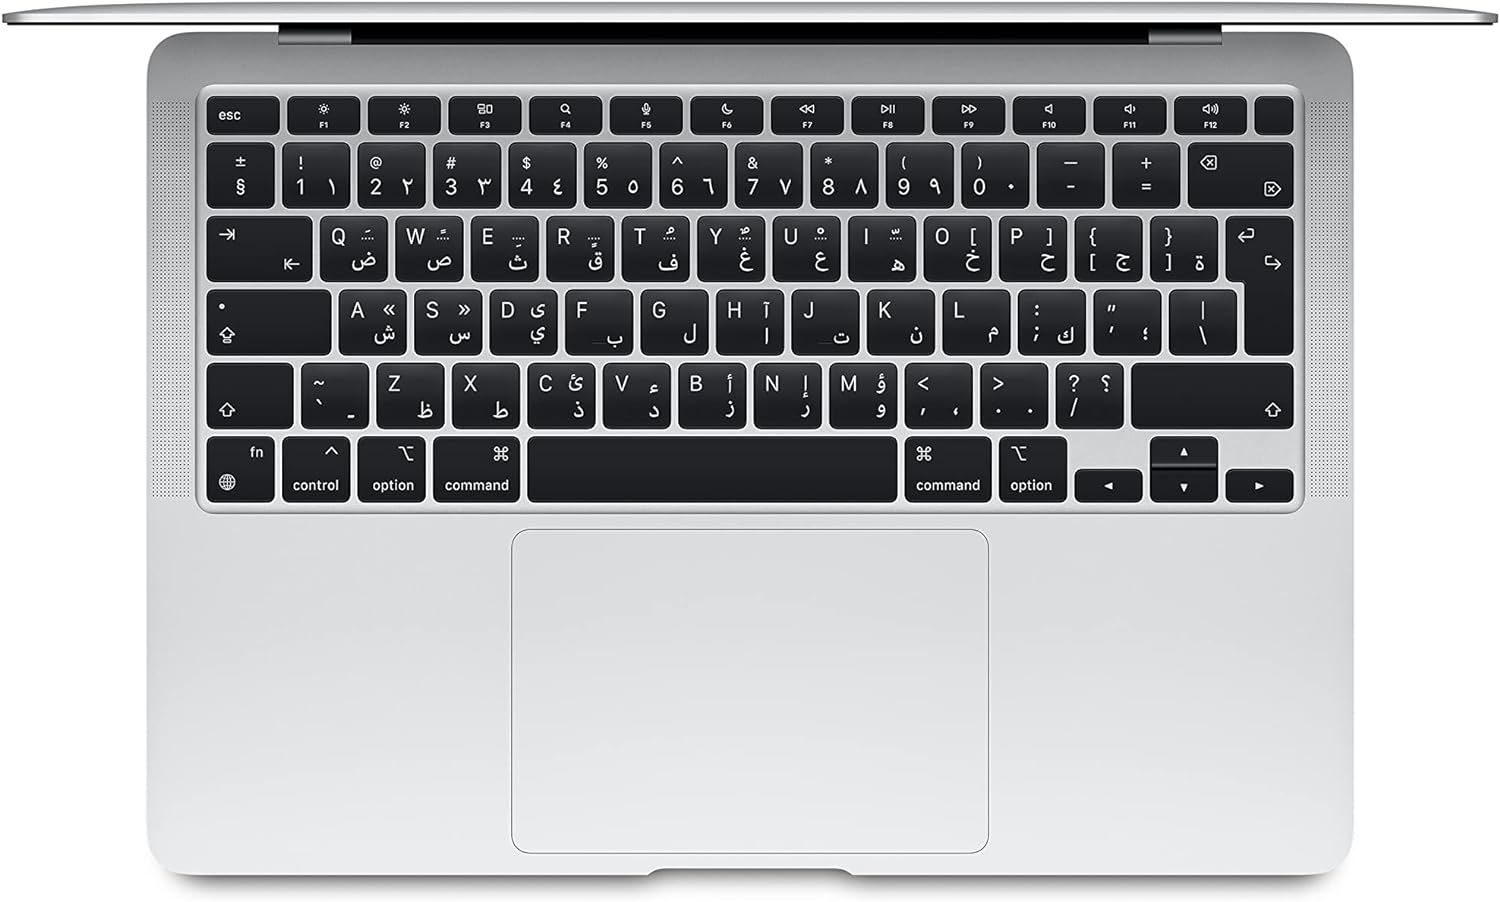 Apple MacBook Air 13-inch Laptop - Powerful Performance with Apple M1 chip for fast processing. 0194252057179